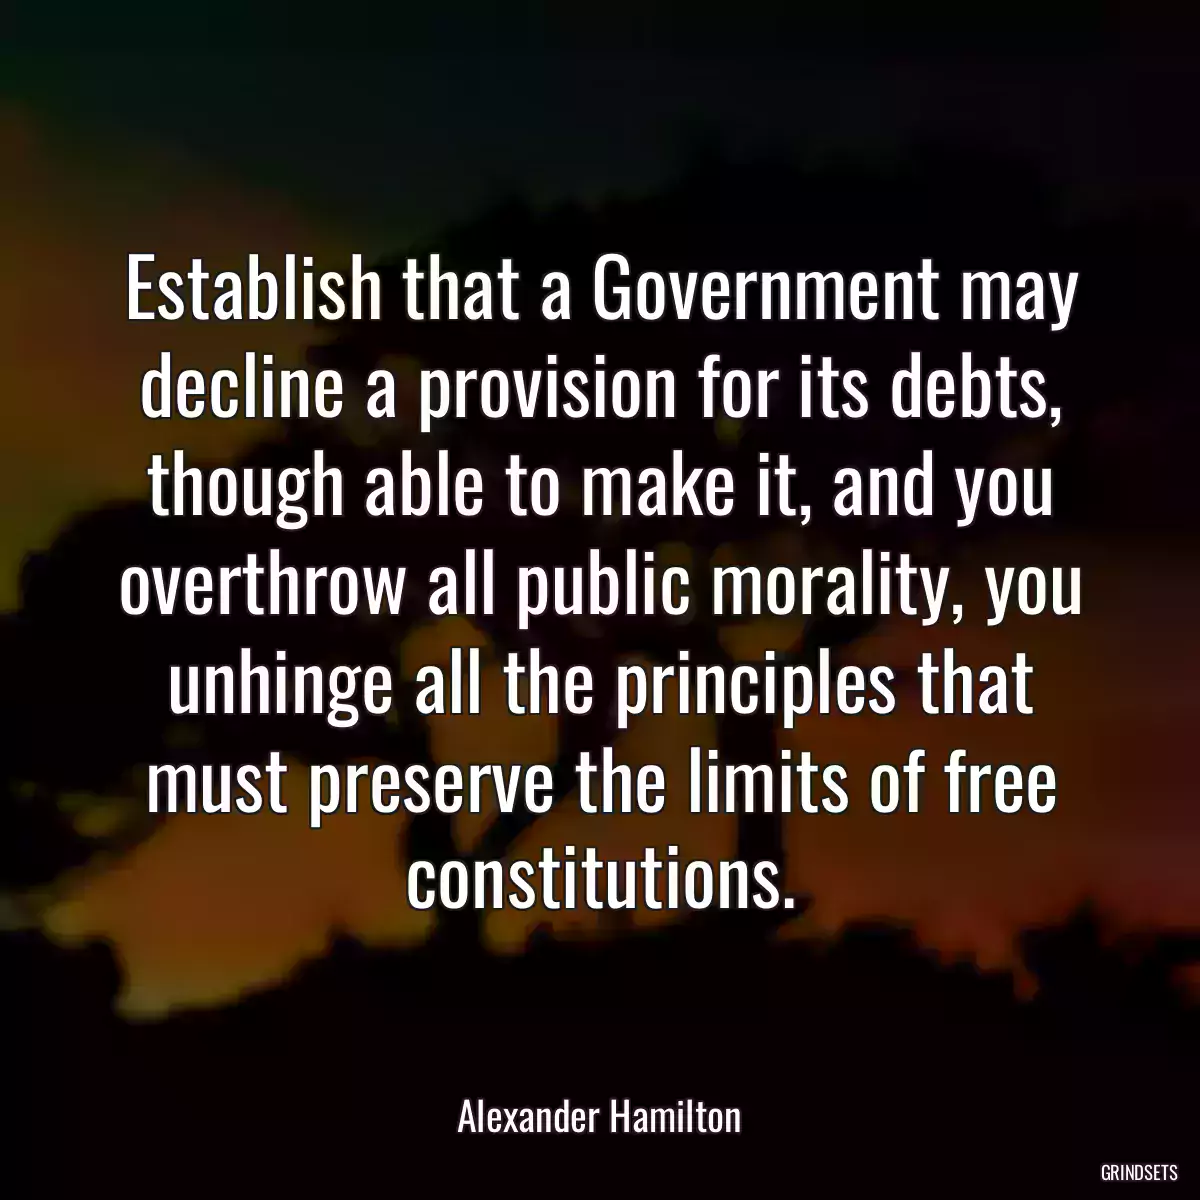 Establish that a Government may decline a provision for its debts, though able to make it, and you overthrow all public morality, you unhinge all the principles that must preserve the limits of free constitutions.